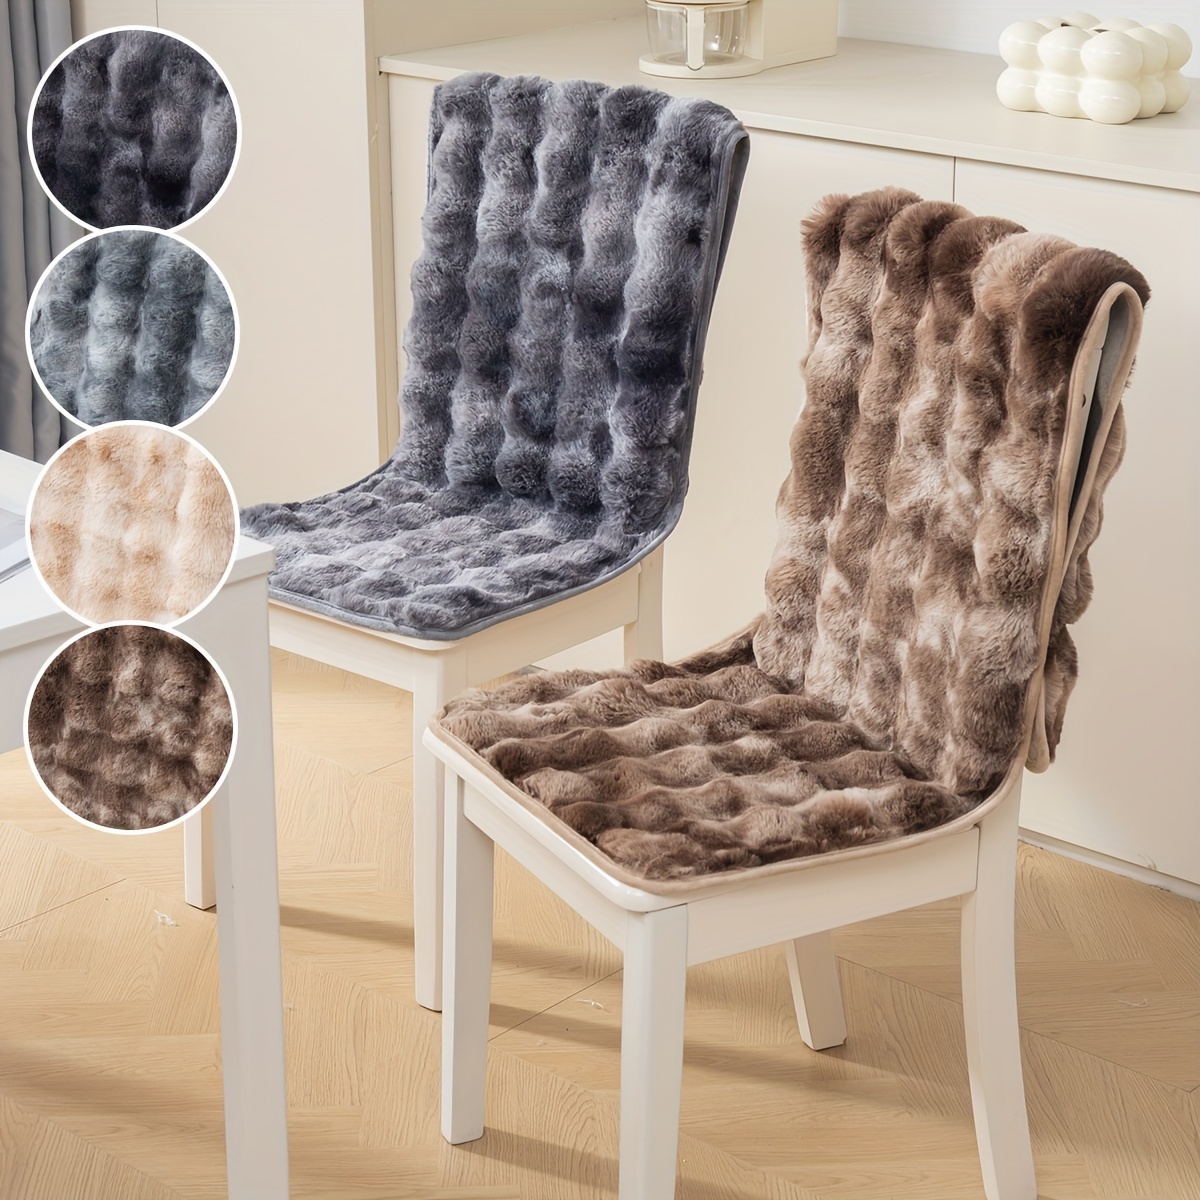 

Glam Style 2pc/set Faux Fur T-cushion Chair Slipcovers With Backrest - Non-slip, Elastic Secure Fit, Machine Washable, Plush Thick Cover For Living Room, Dining Room, Office Chair - Home Decor